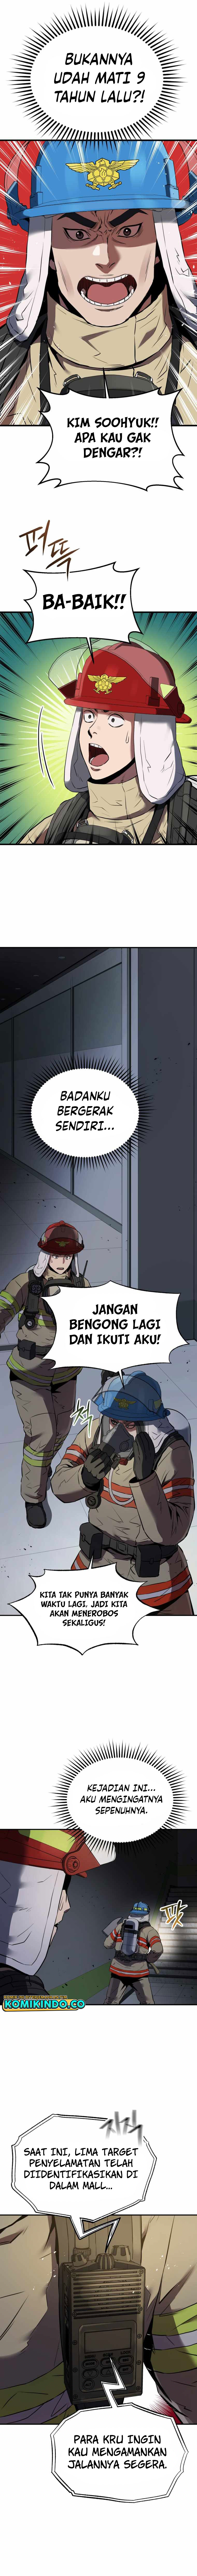 Rescue System Chapter 01